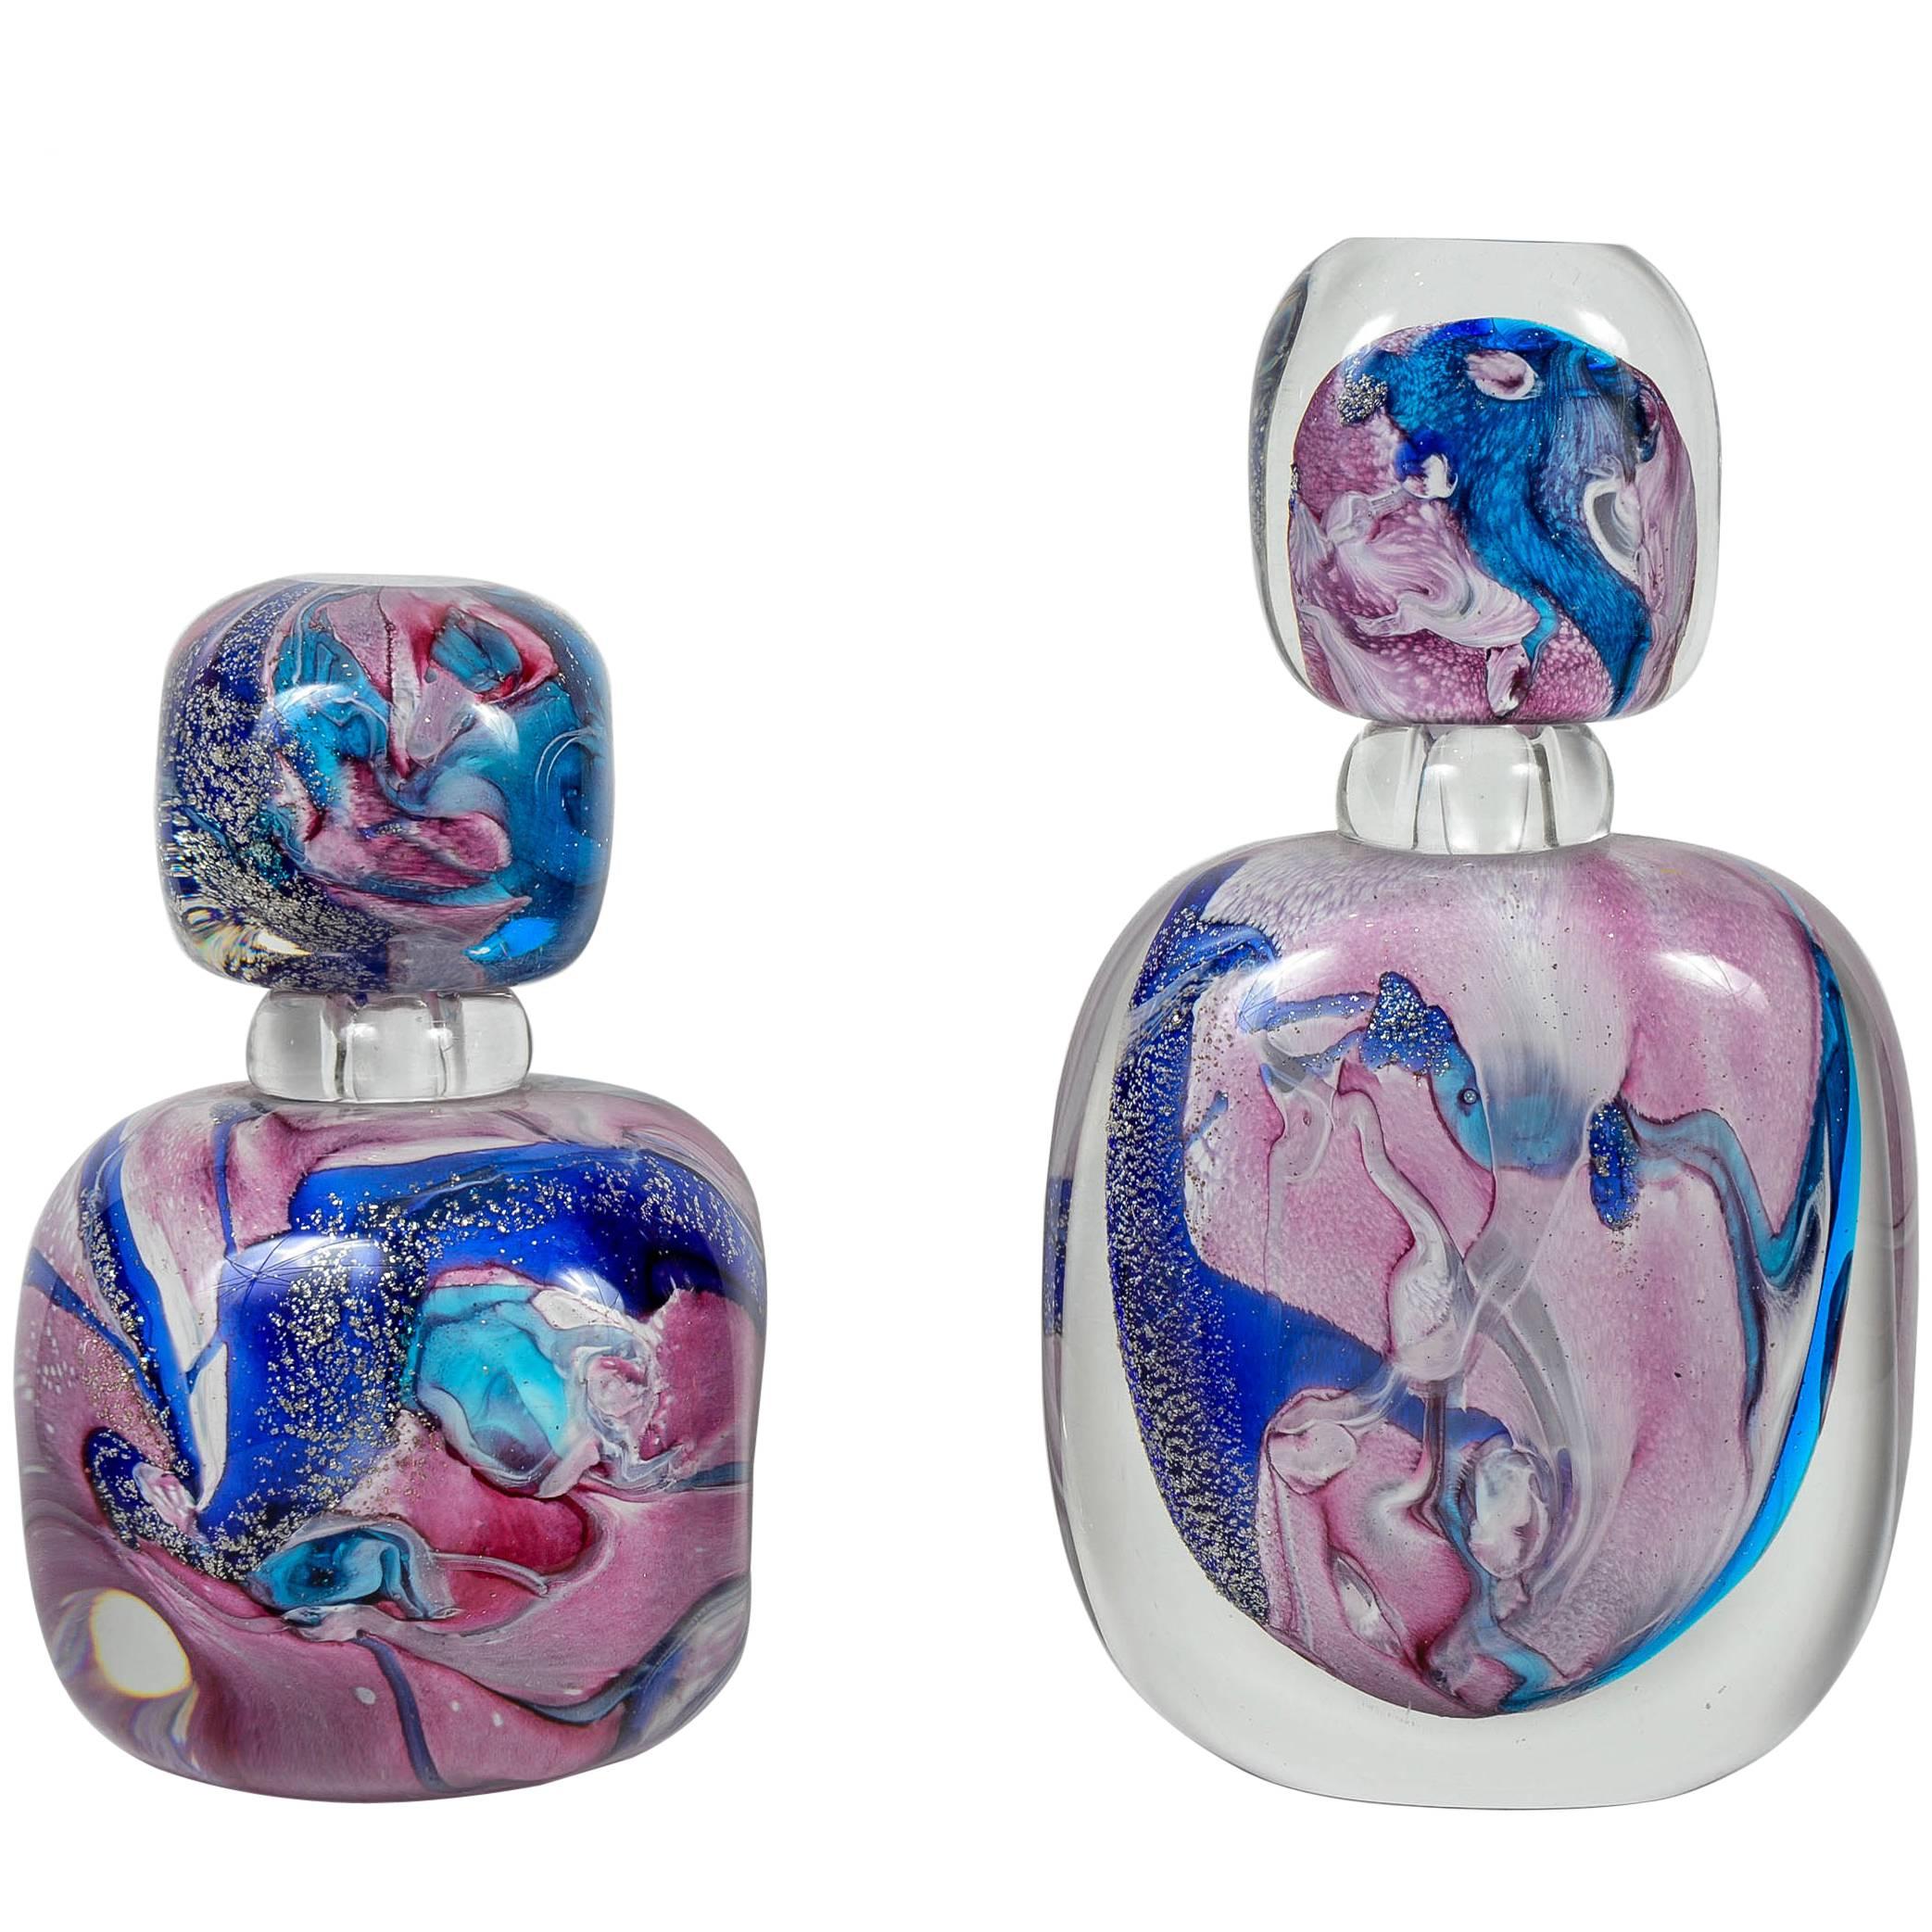 Pair of Perfume Bottles in Murano Glass, Signed by Michele Onesto